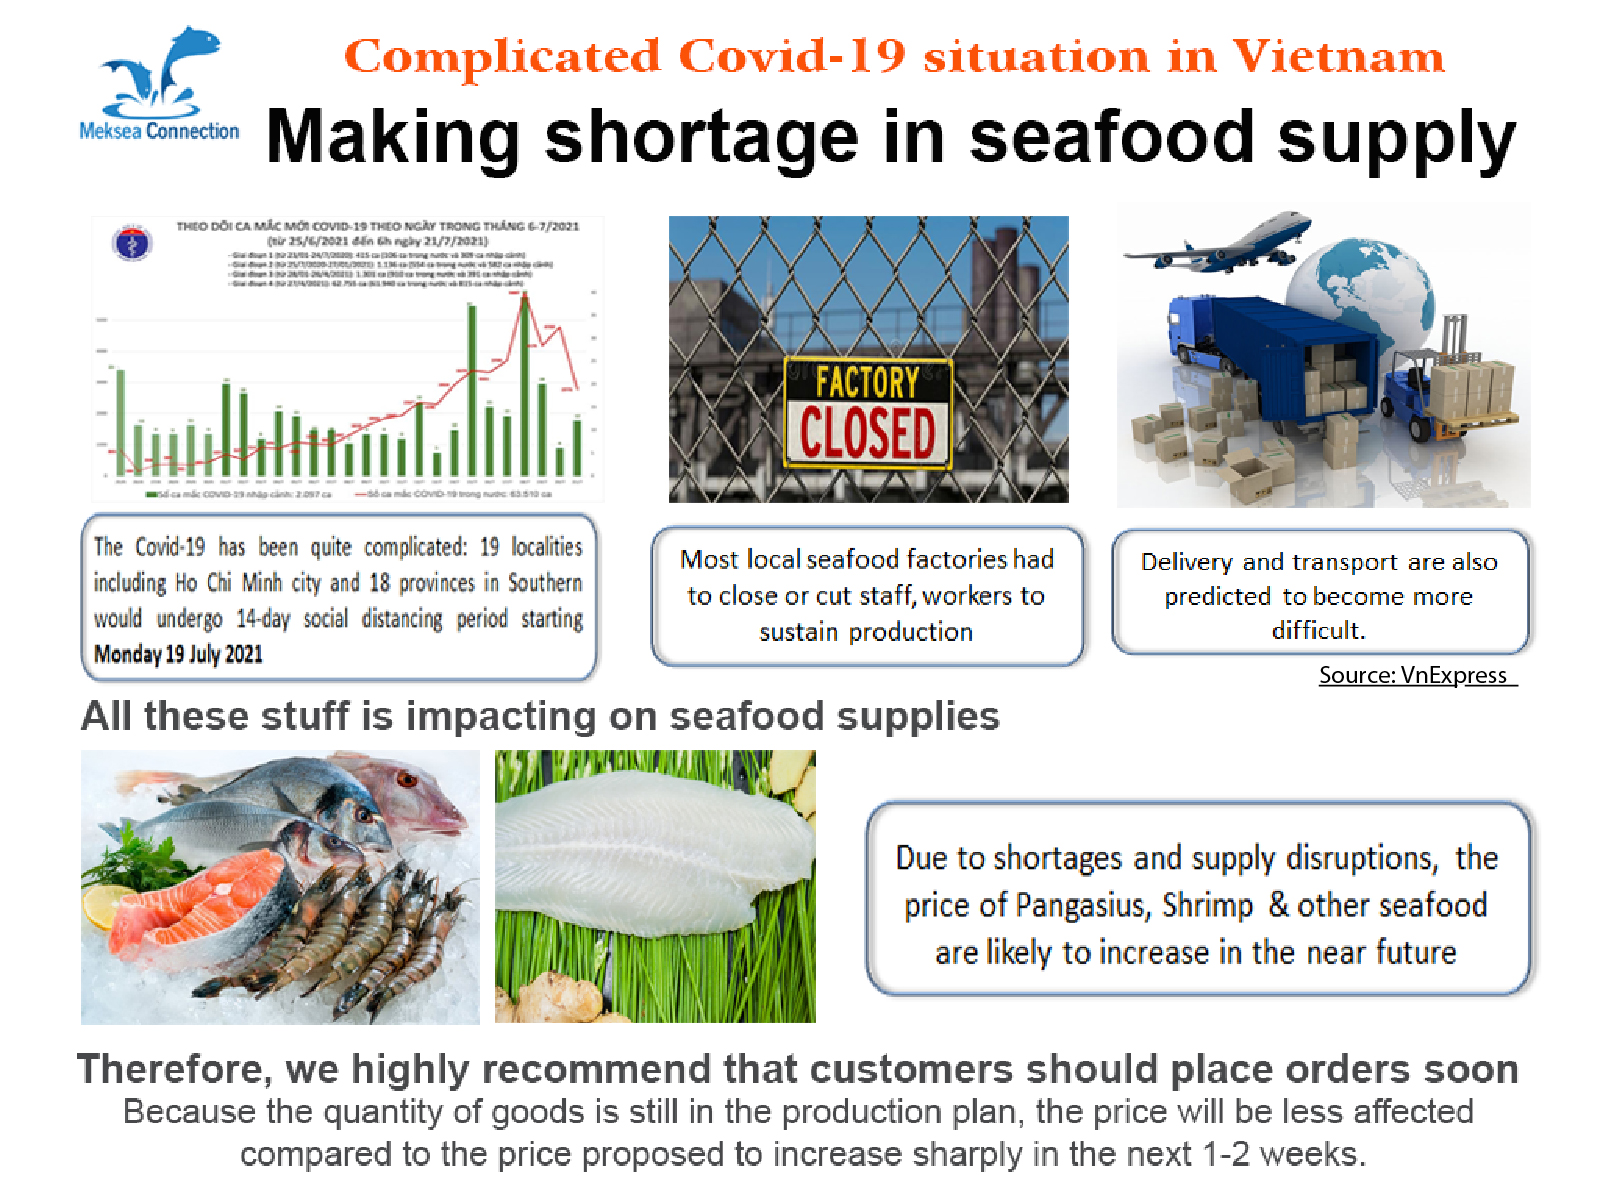 What may affect the seafood supplies